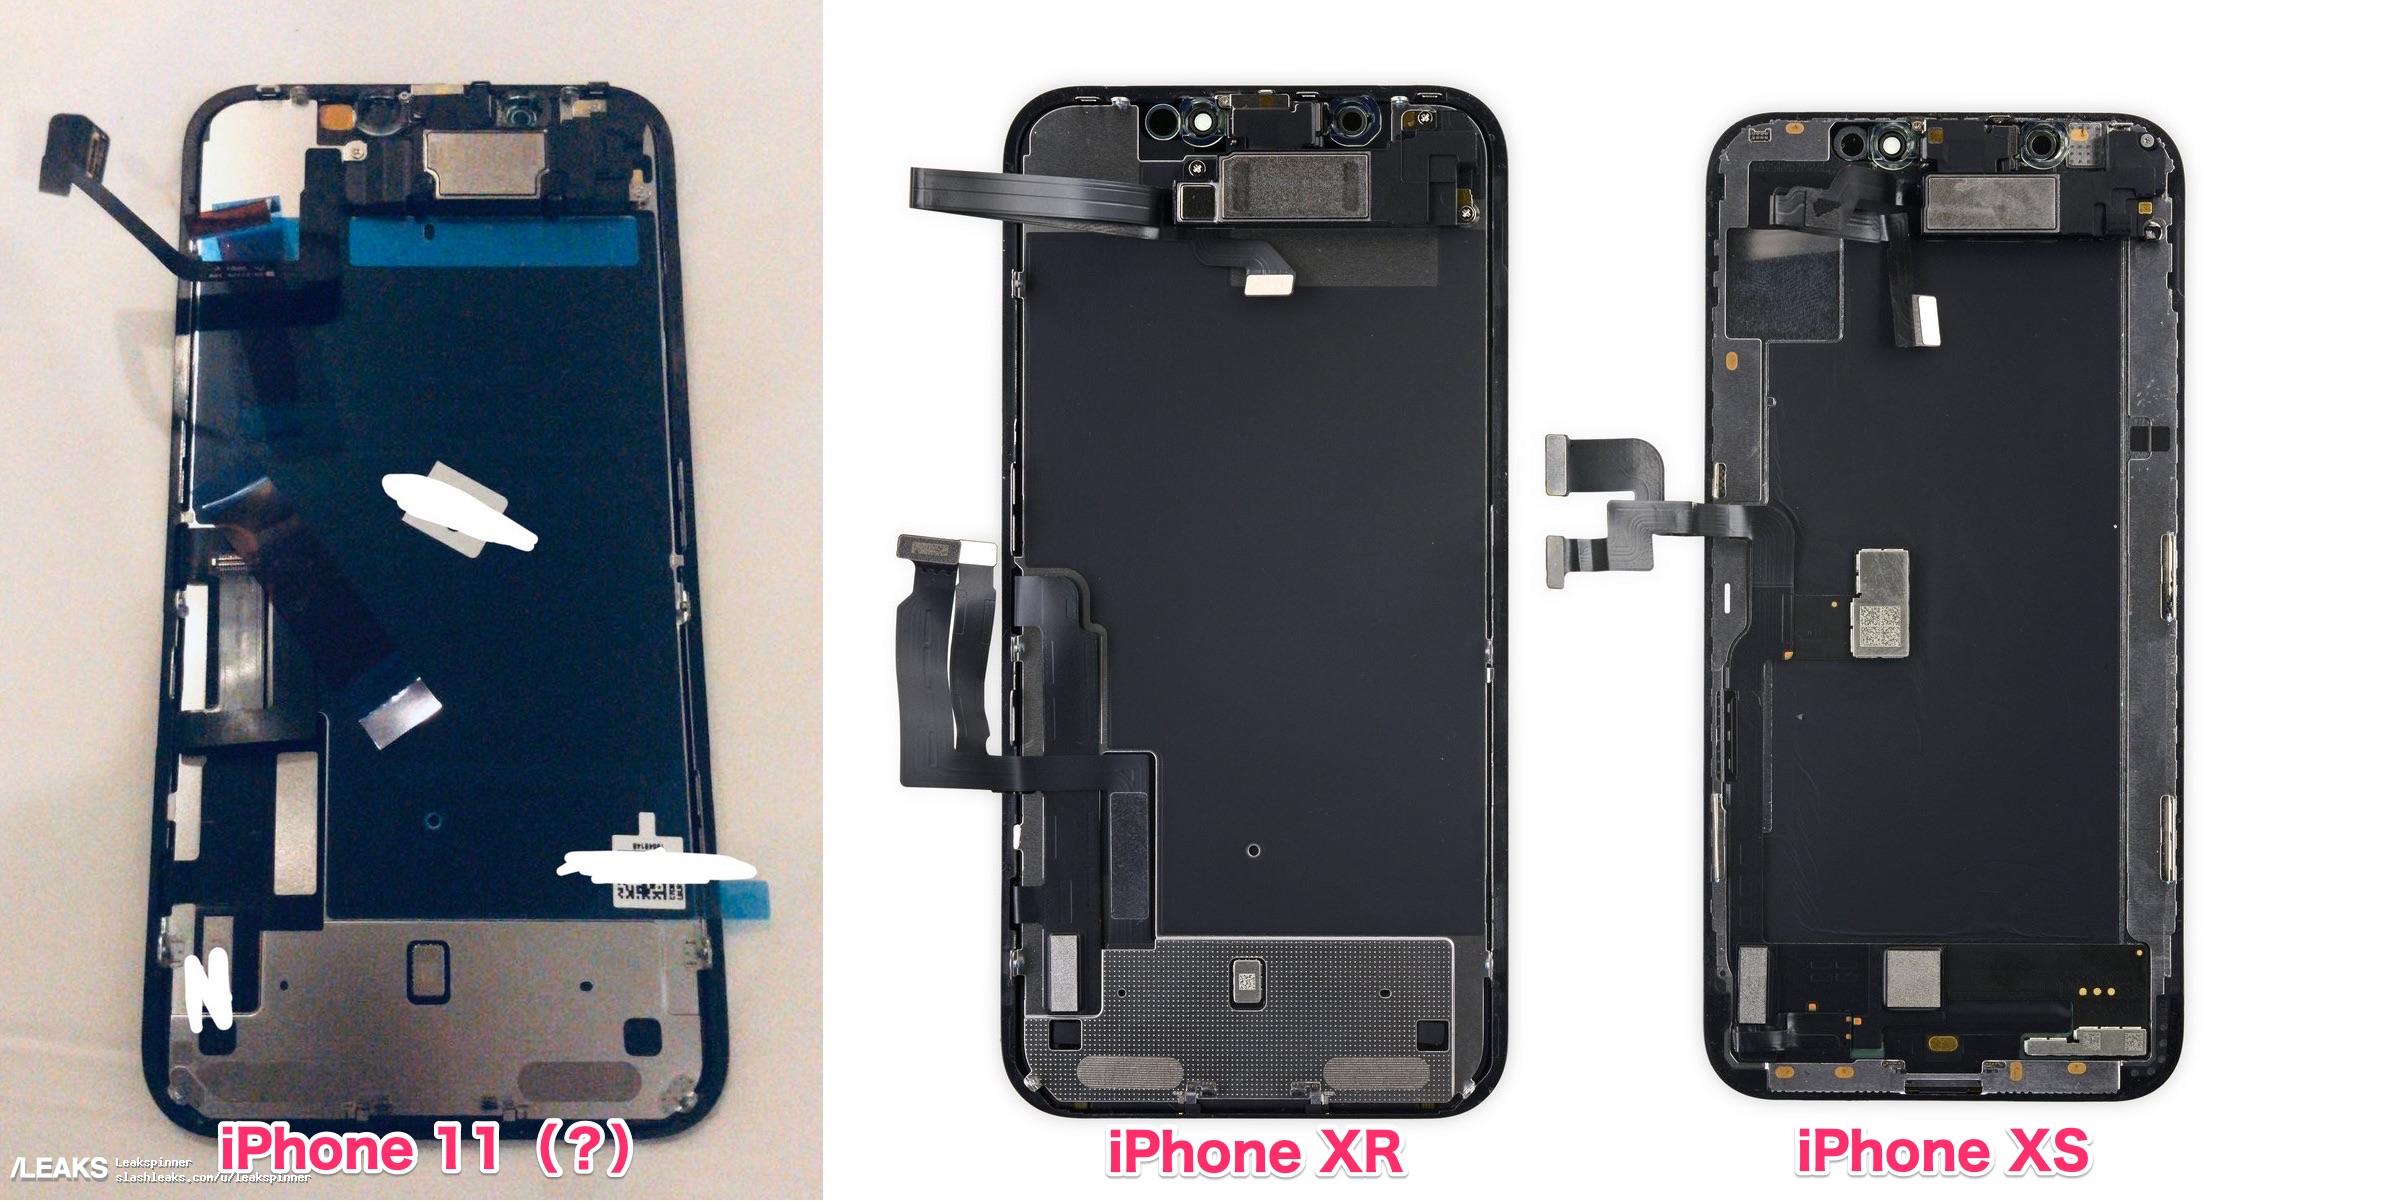 alleged iphone xi front panel leaks out